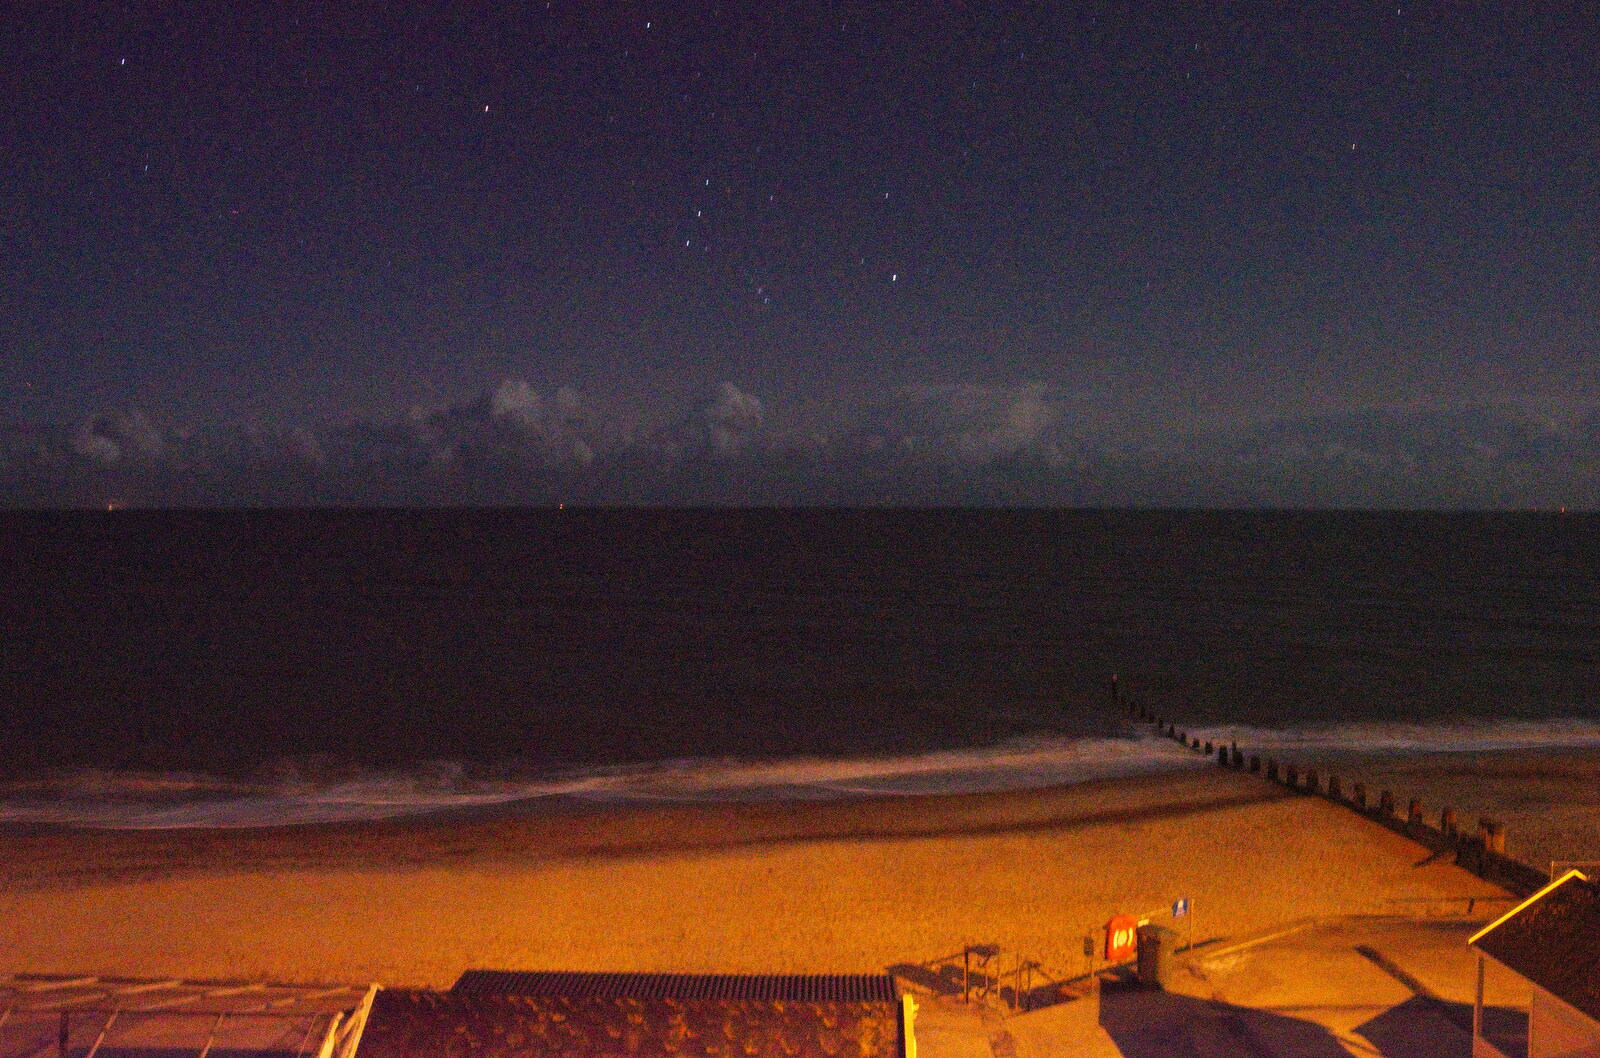 The constellation of Orion rises over the sea from A Night at the Crown Hotel, Southwold, Suffolk - 8th November 2019